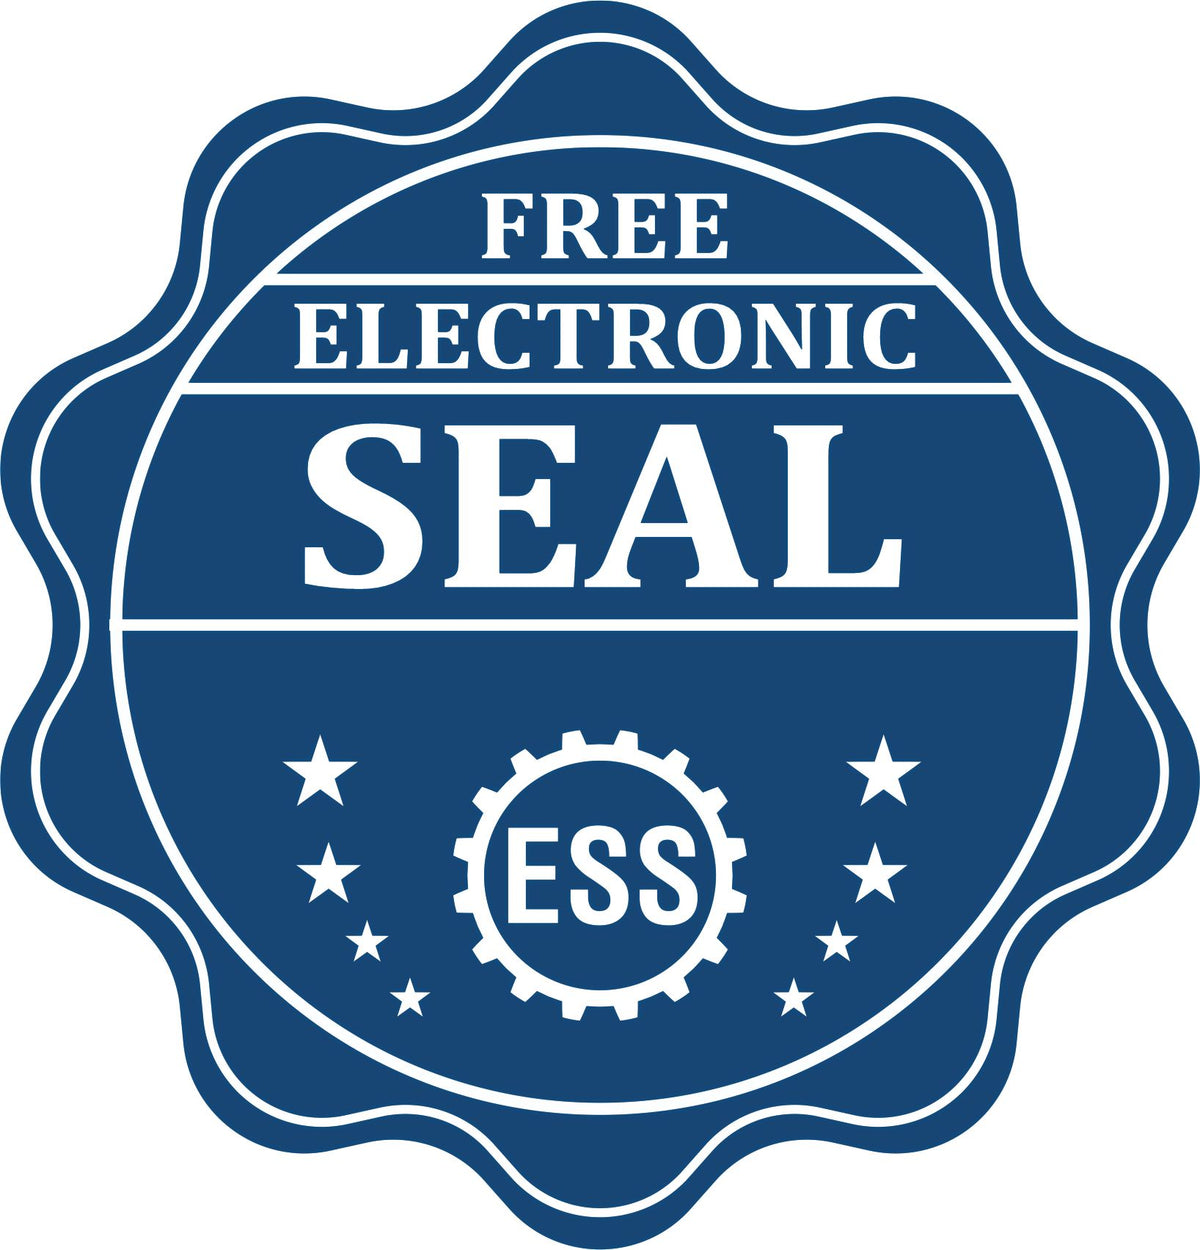 A badge showing a free electronic seal for the North Carolina Geologist Desk Seal with stars and the ESS gear on the emblem.